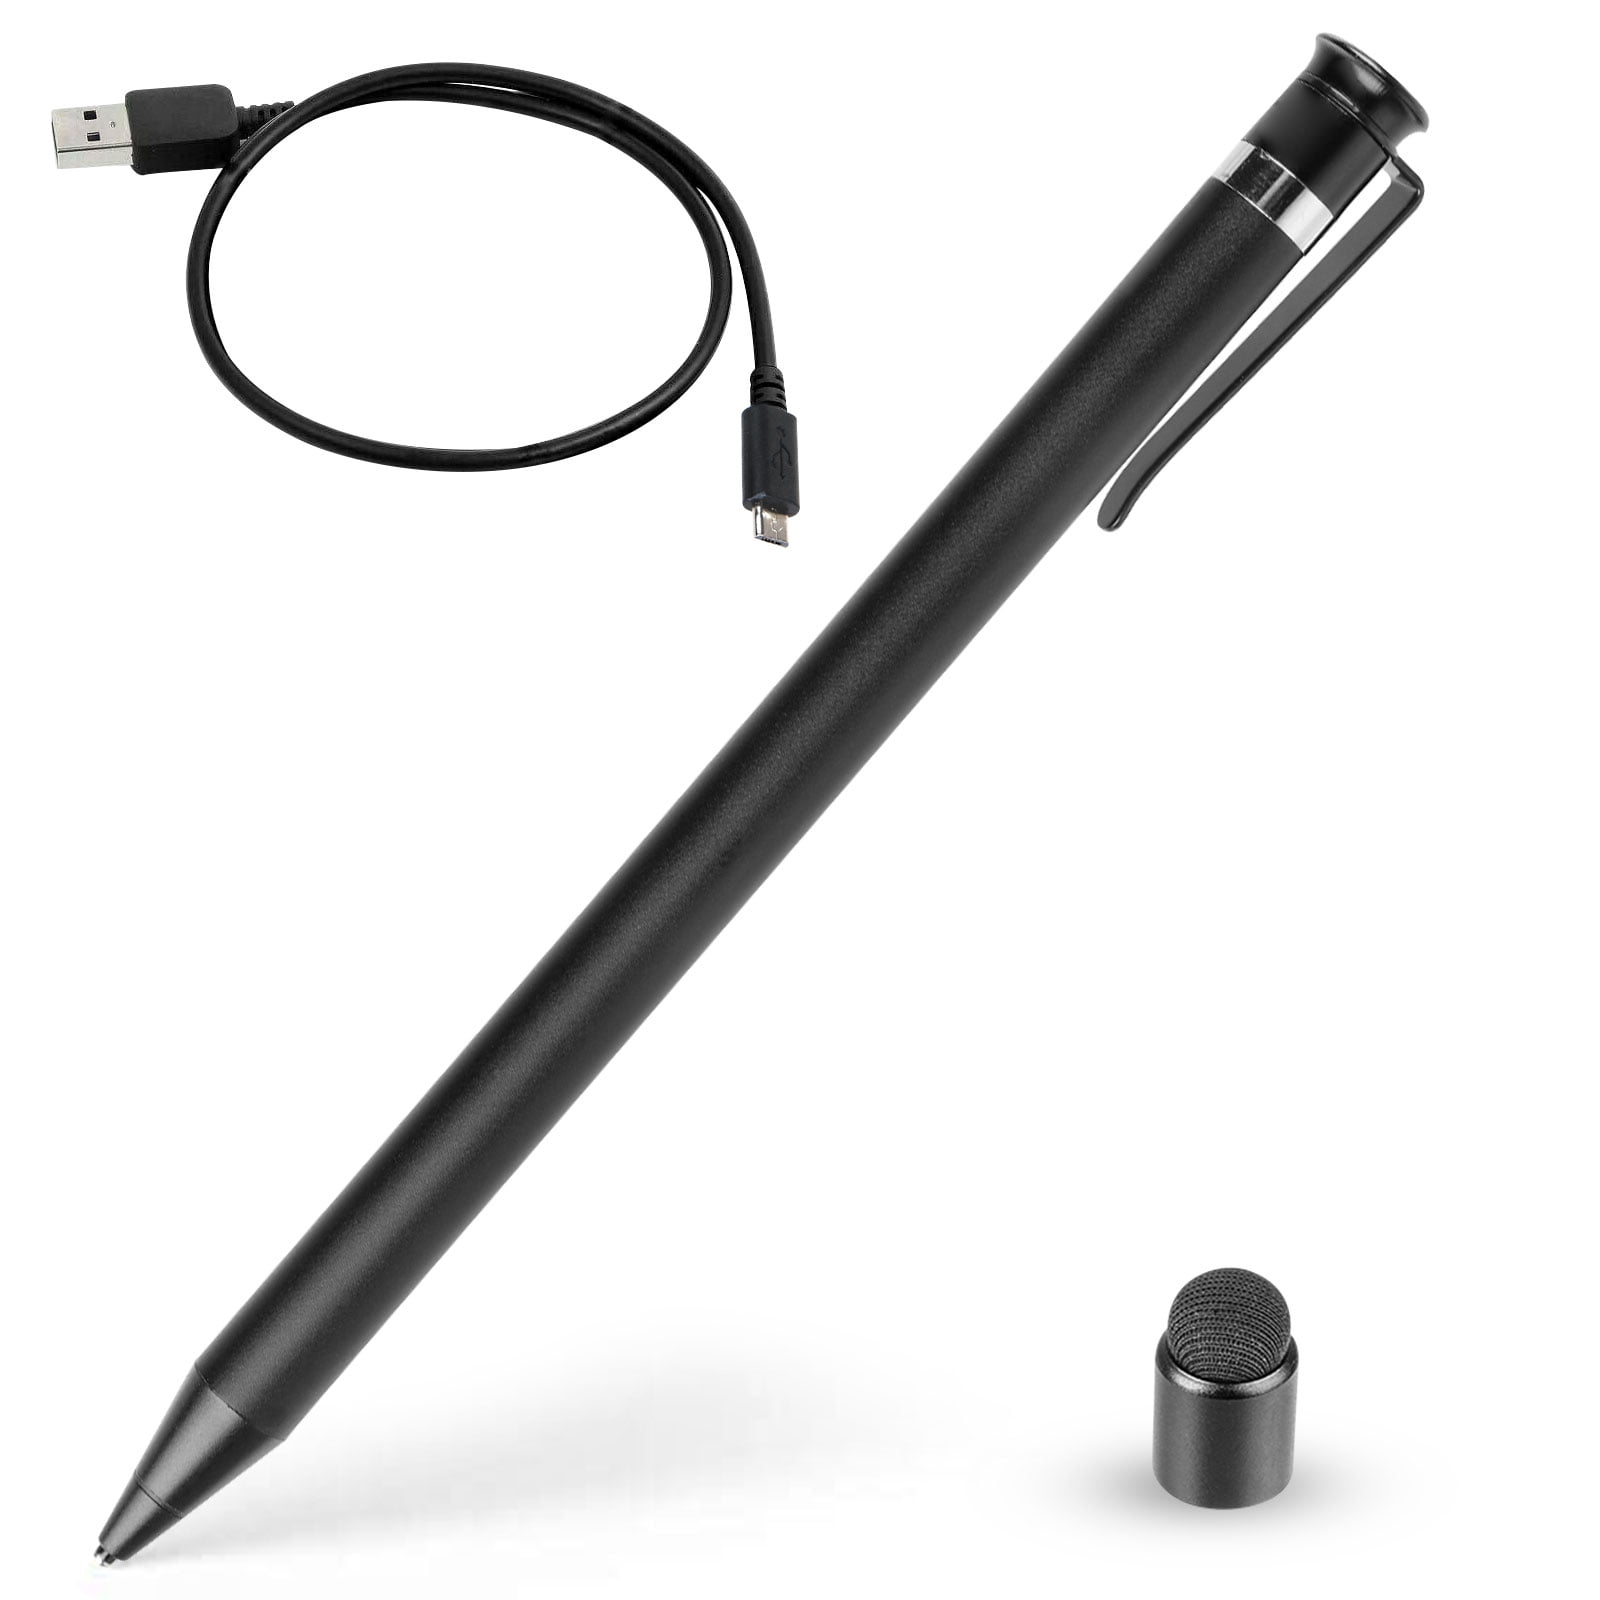 Metal Universal Touch Screen Pen Stylus Fr Cell Phone iPhone iPod iPad Tablet PC 